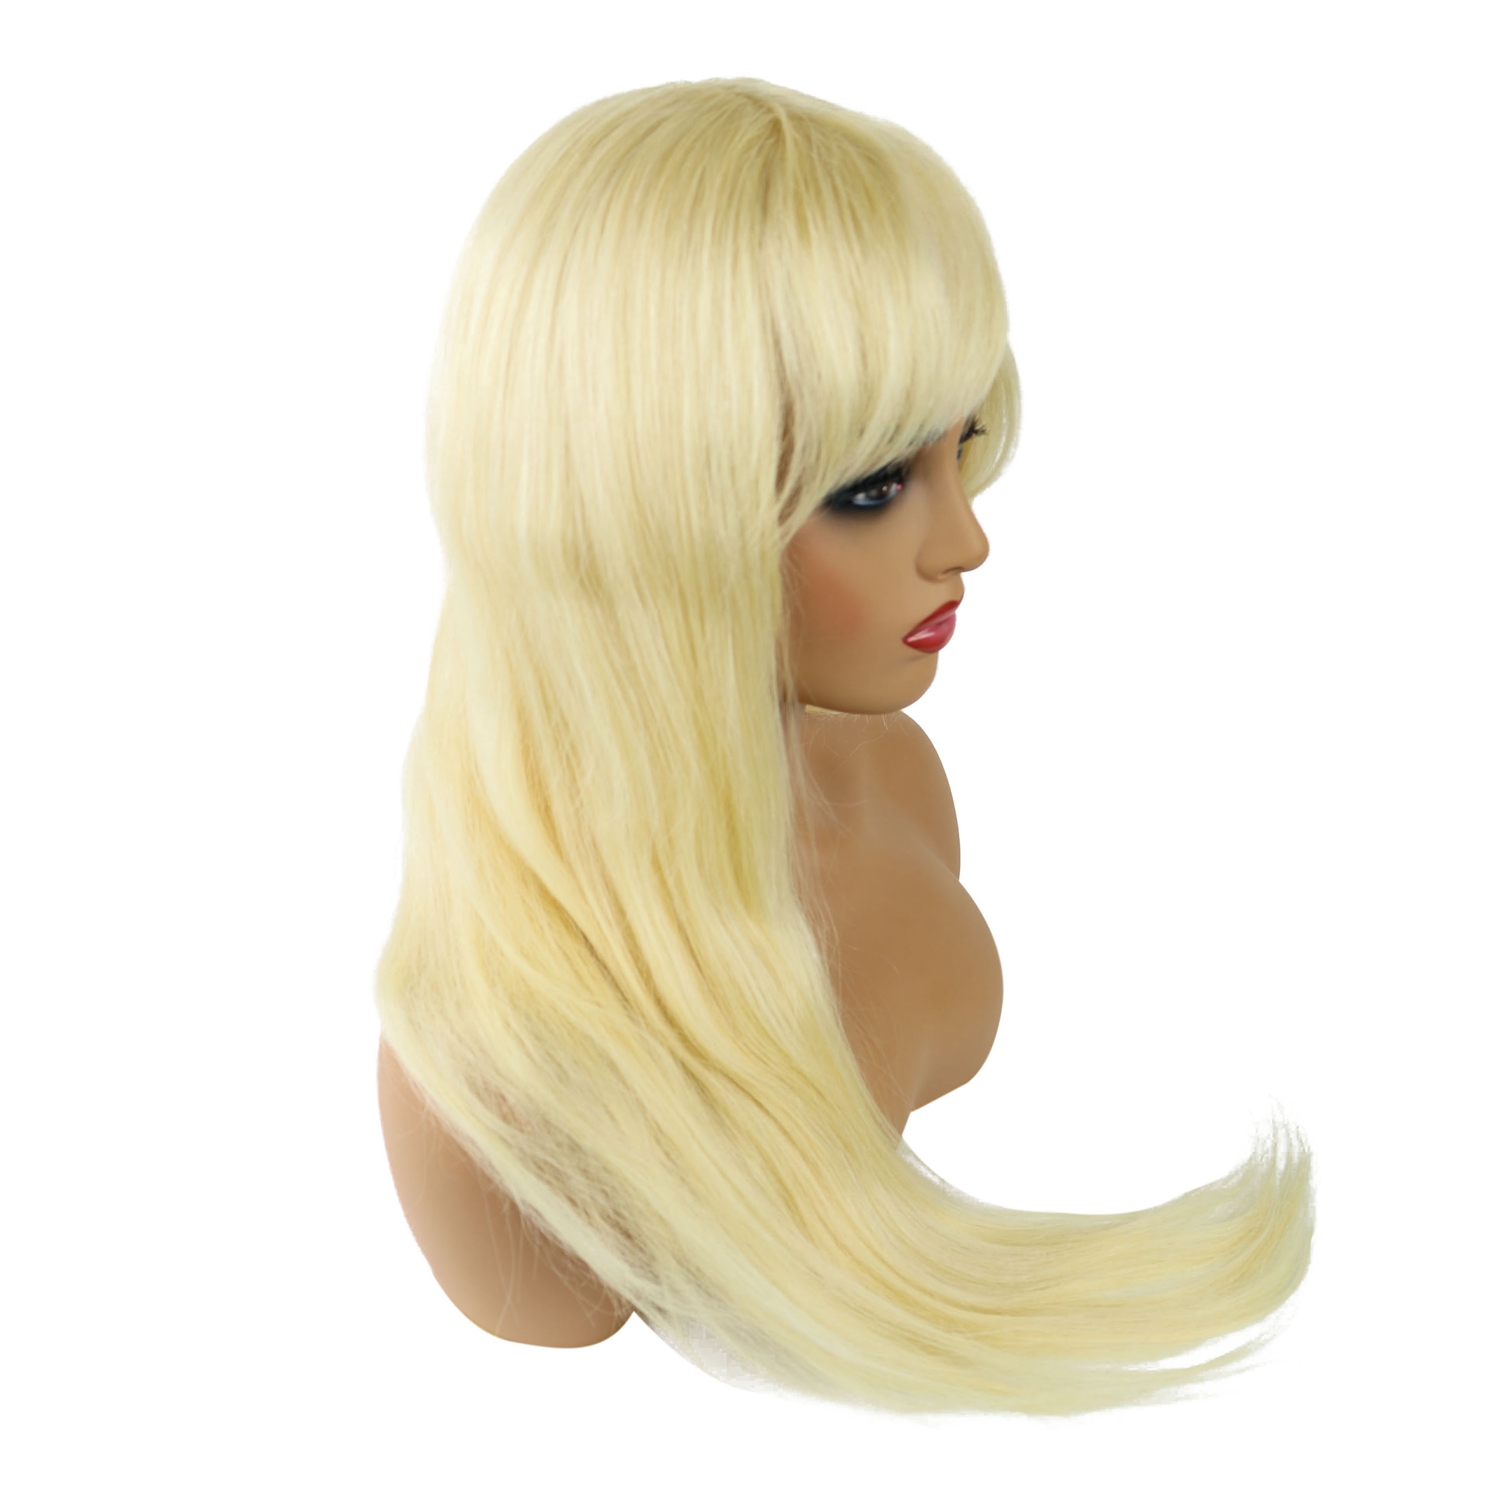 Human Hair Capless Straight 120% 24 Inches Wigs With Bangs